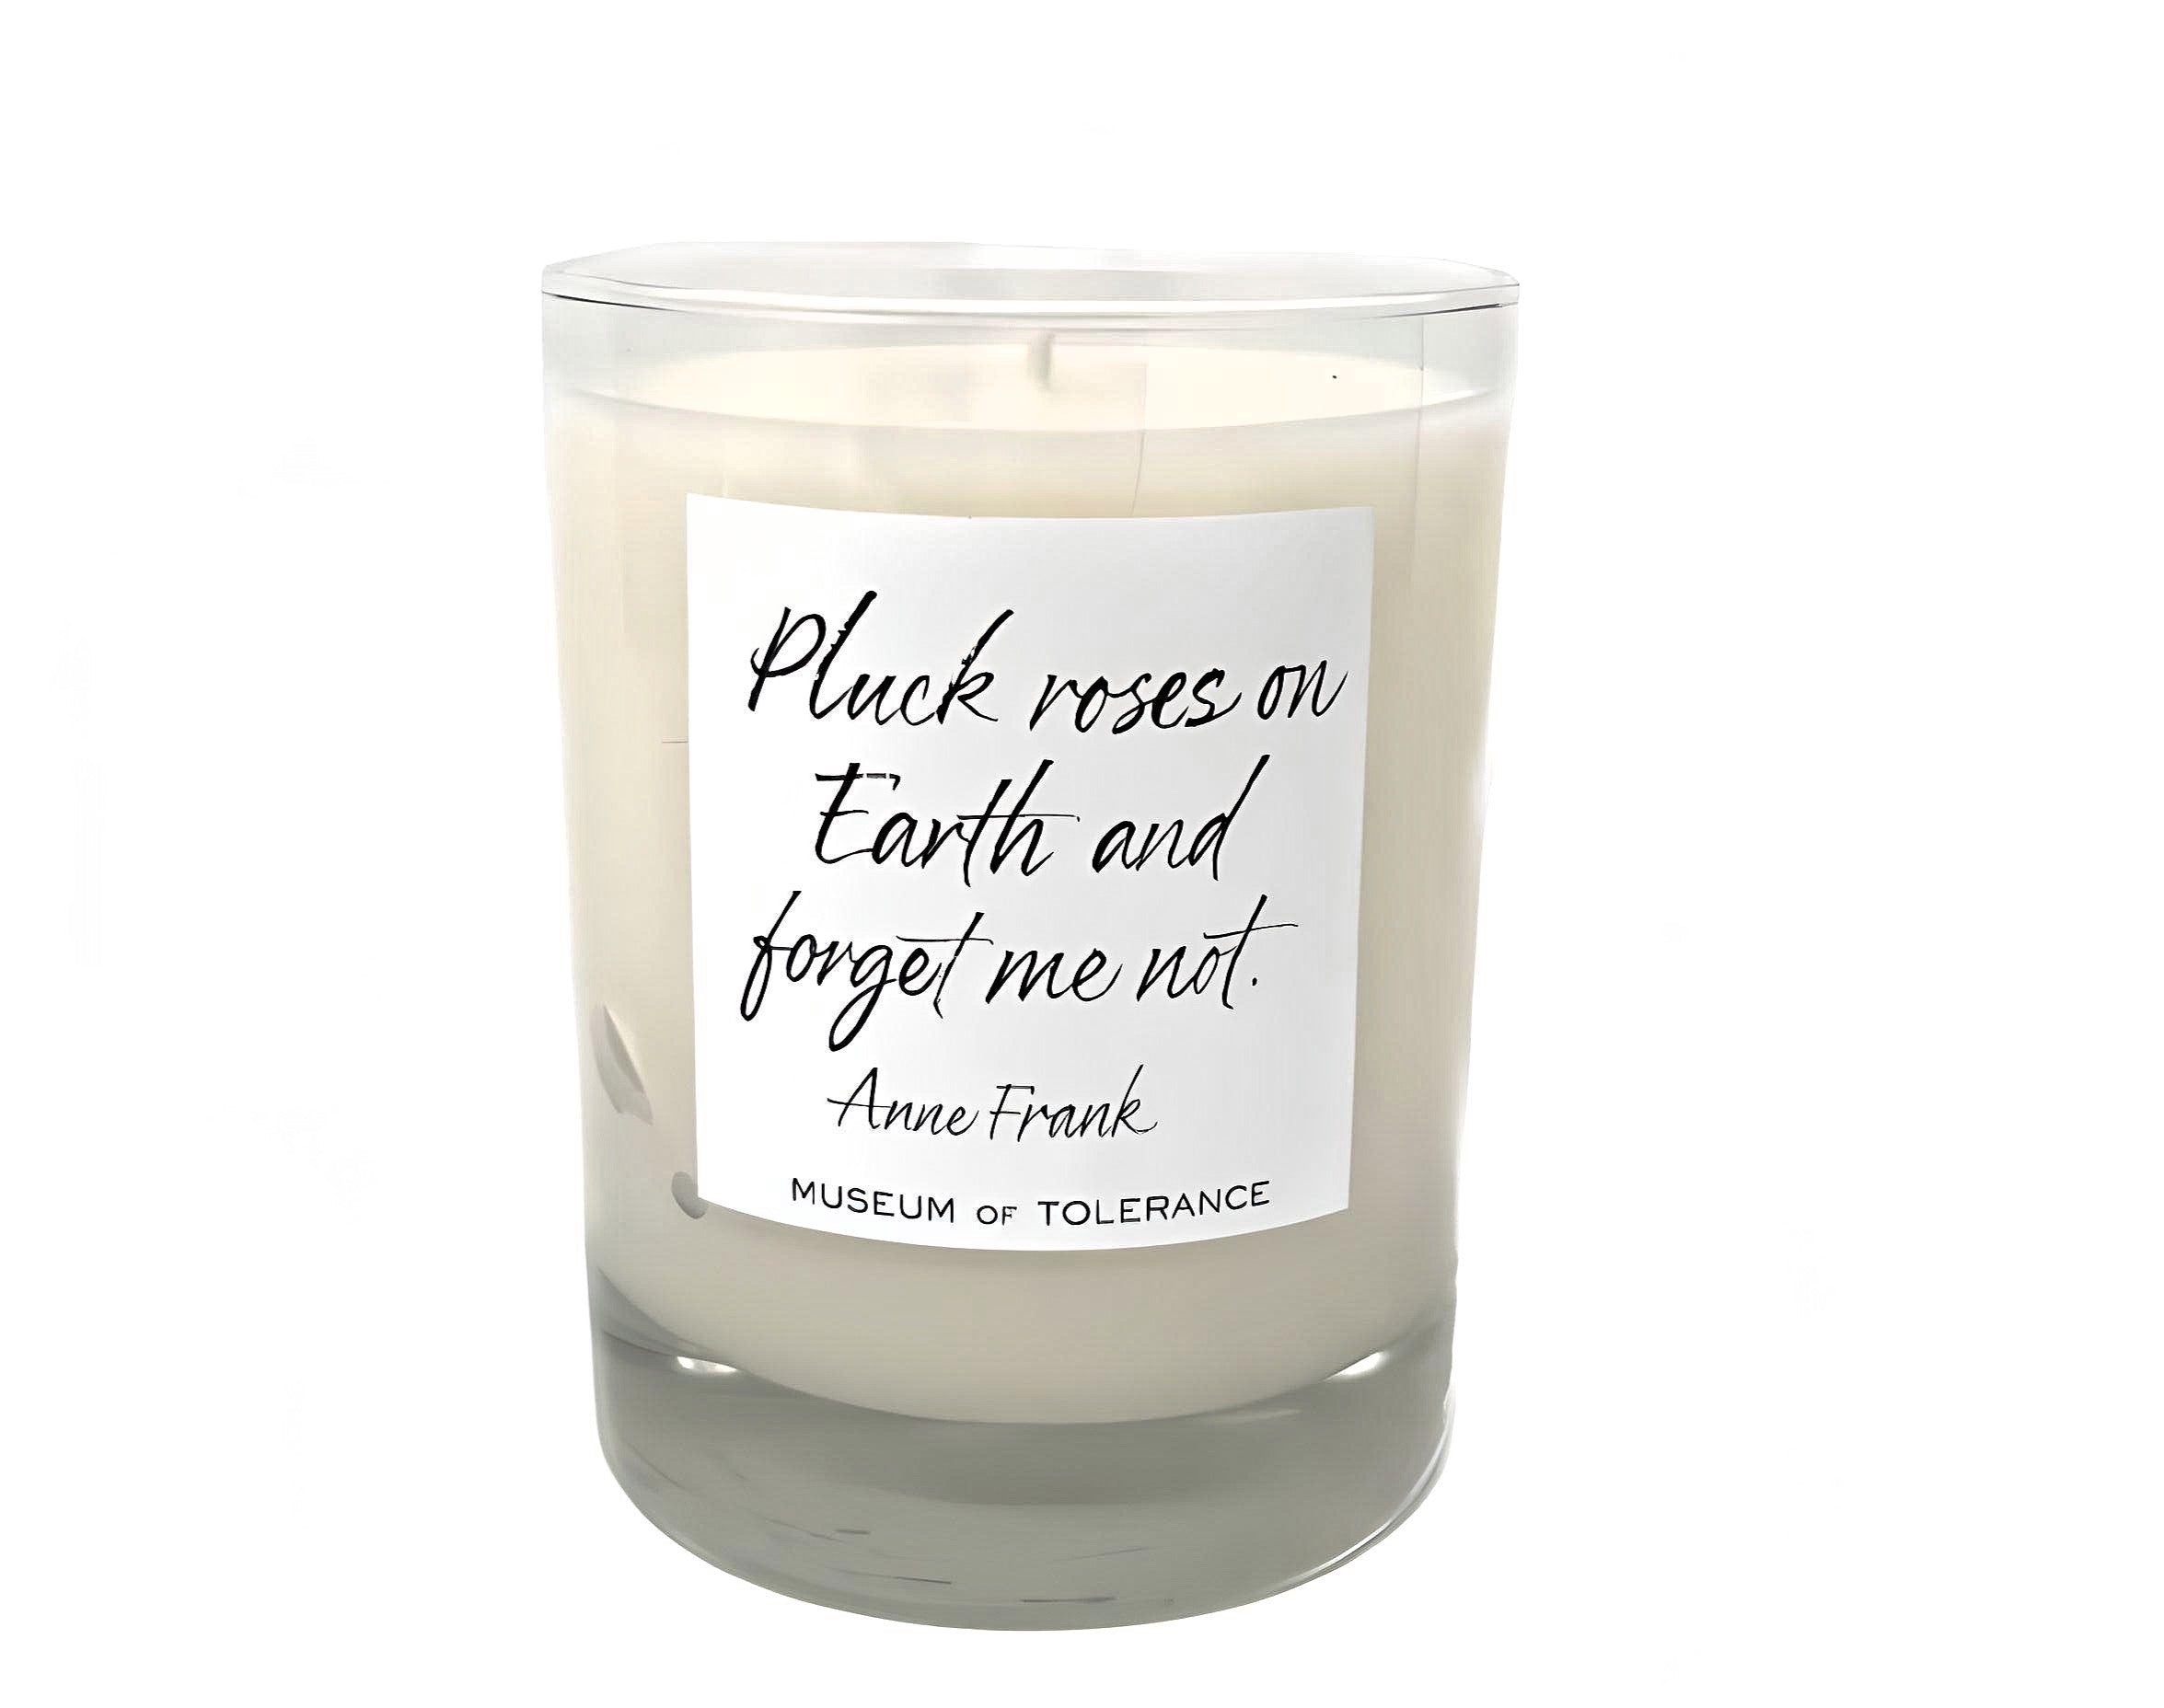 Anne Frank "Pluck Roses" Candle